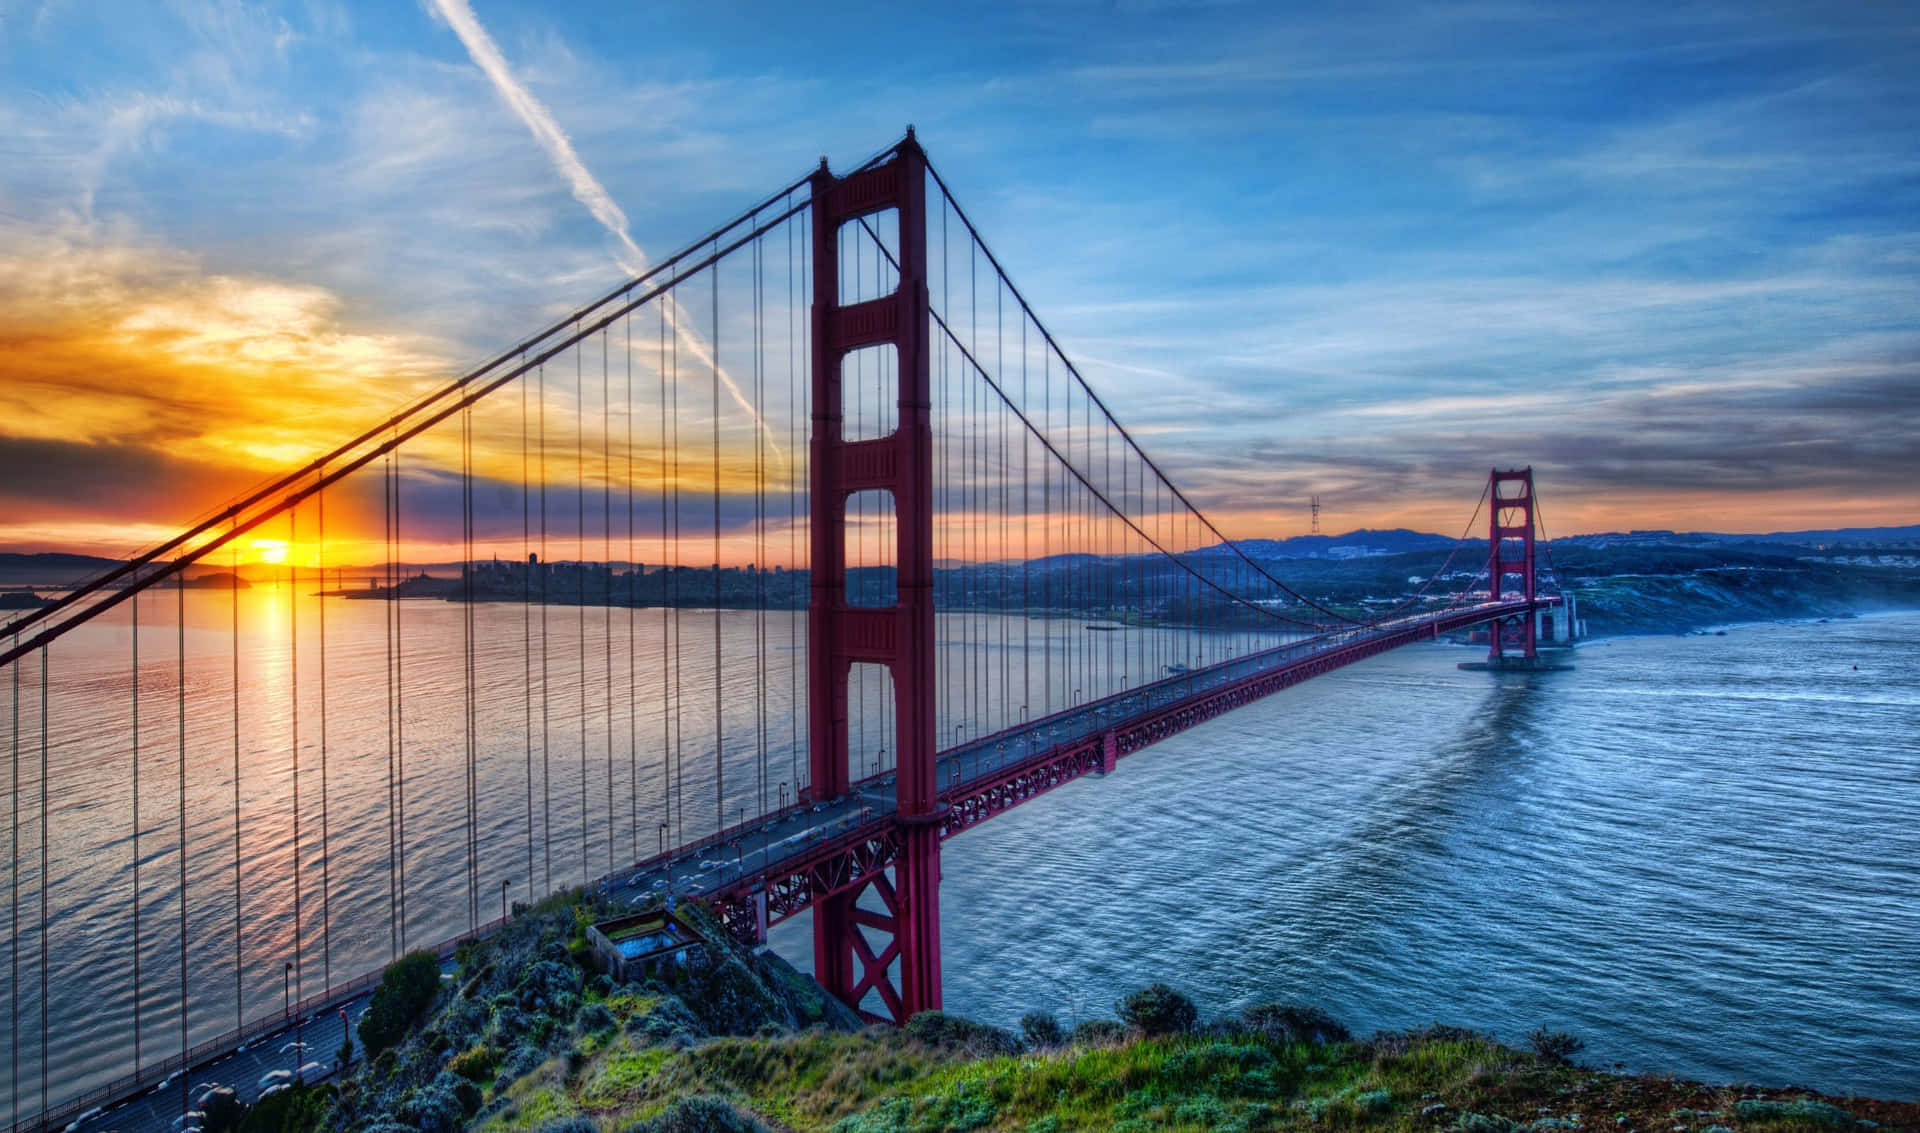 Take a tour of iconic landmarks and attractions around San Francisco.